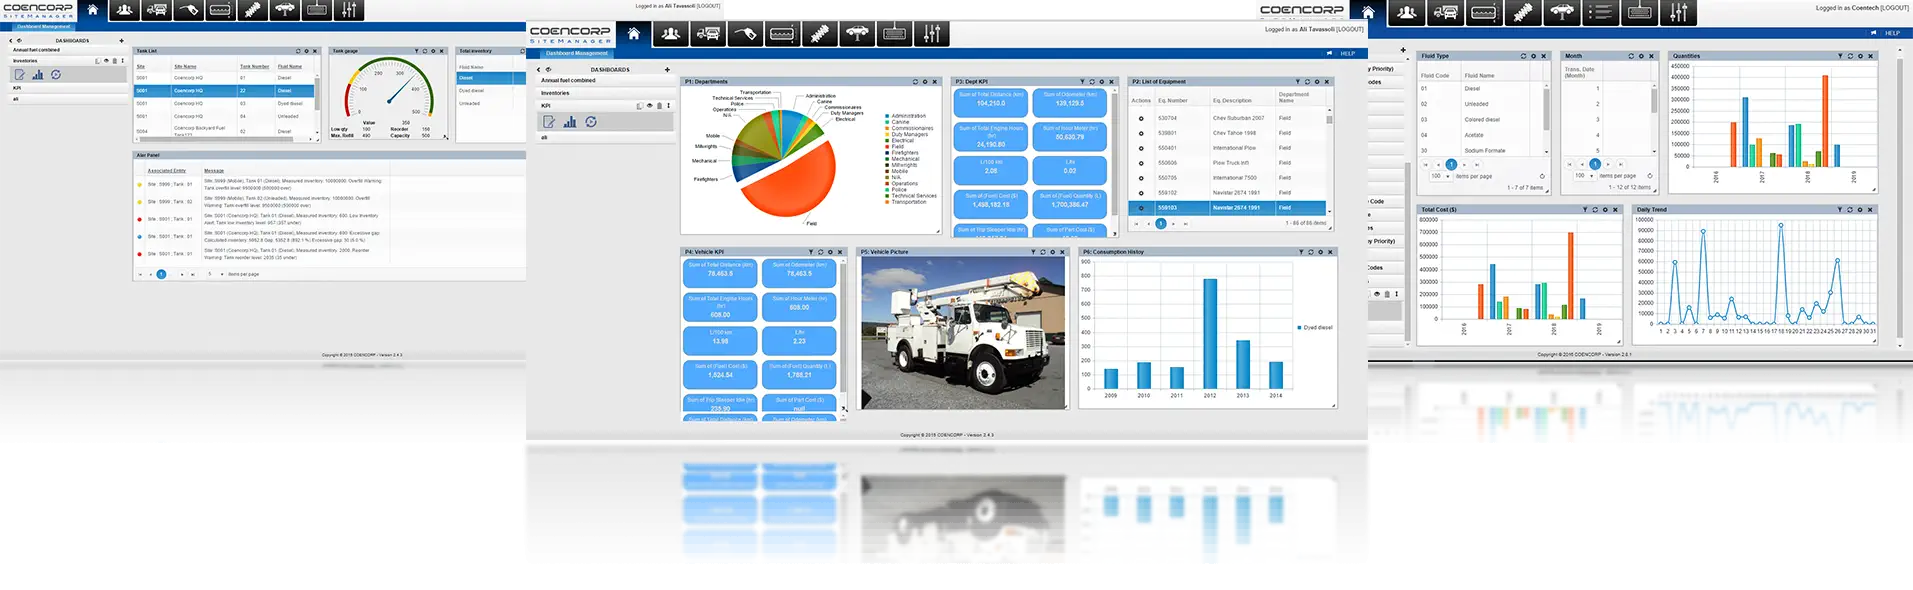 fleet-fuel-management-dashboards-with-reflections